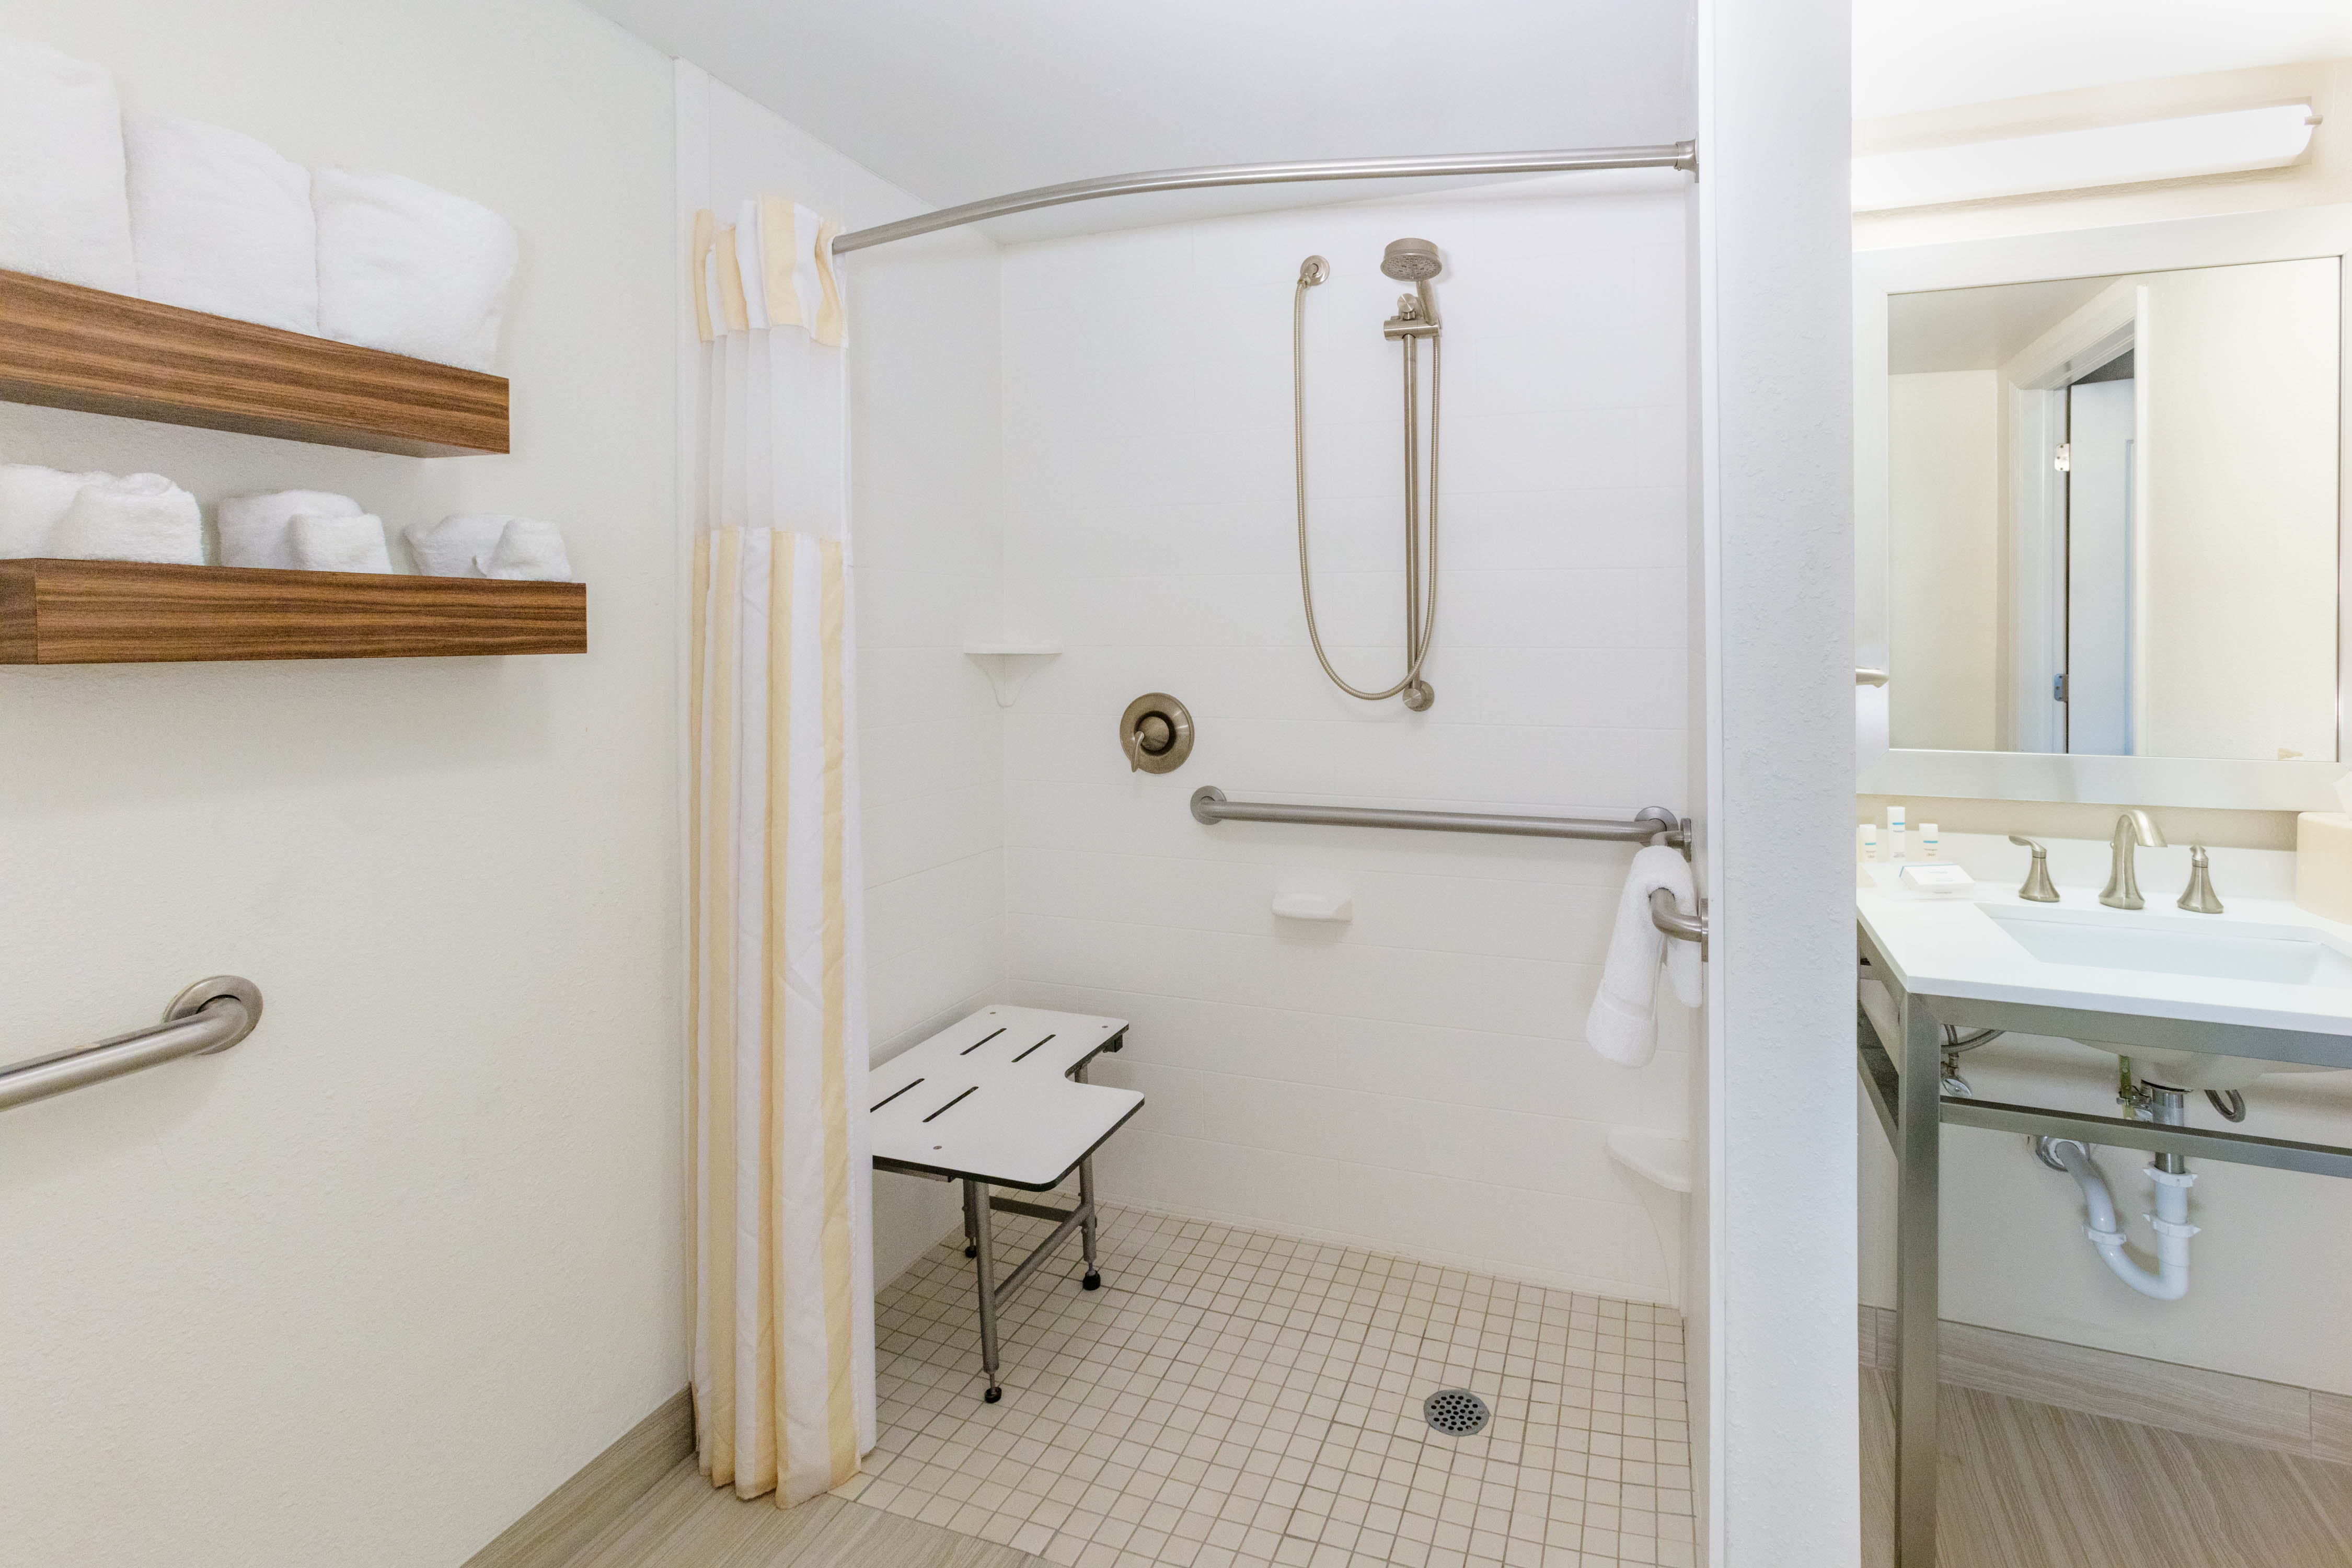 Accessible Shower, Sink and Towels